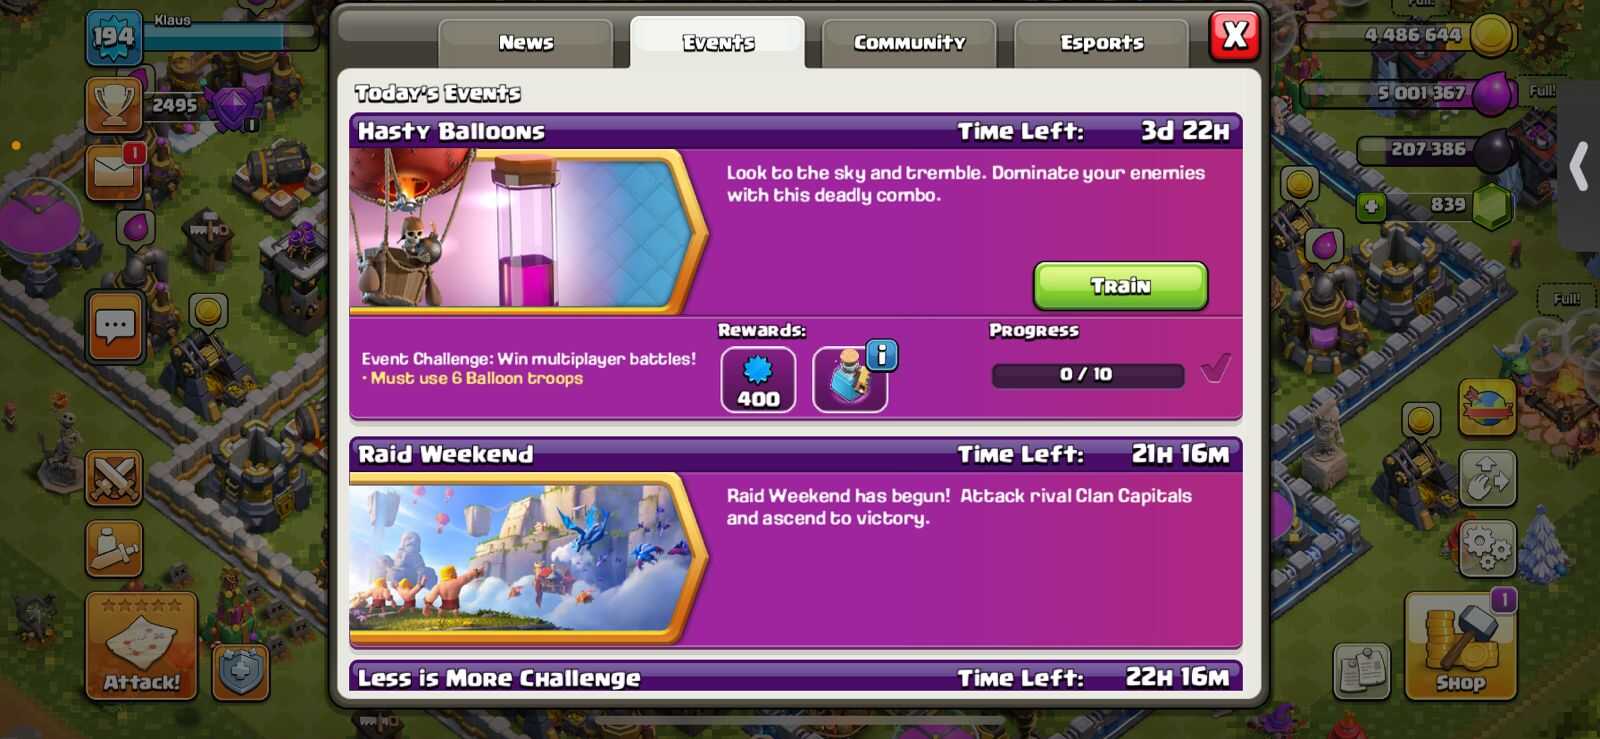 Hasty Balloons challenge in Clash of Clans